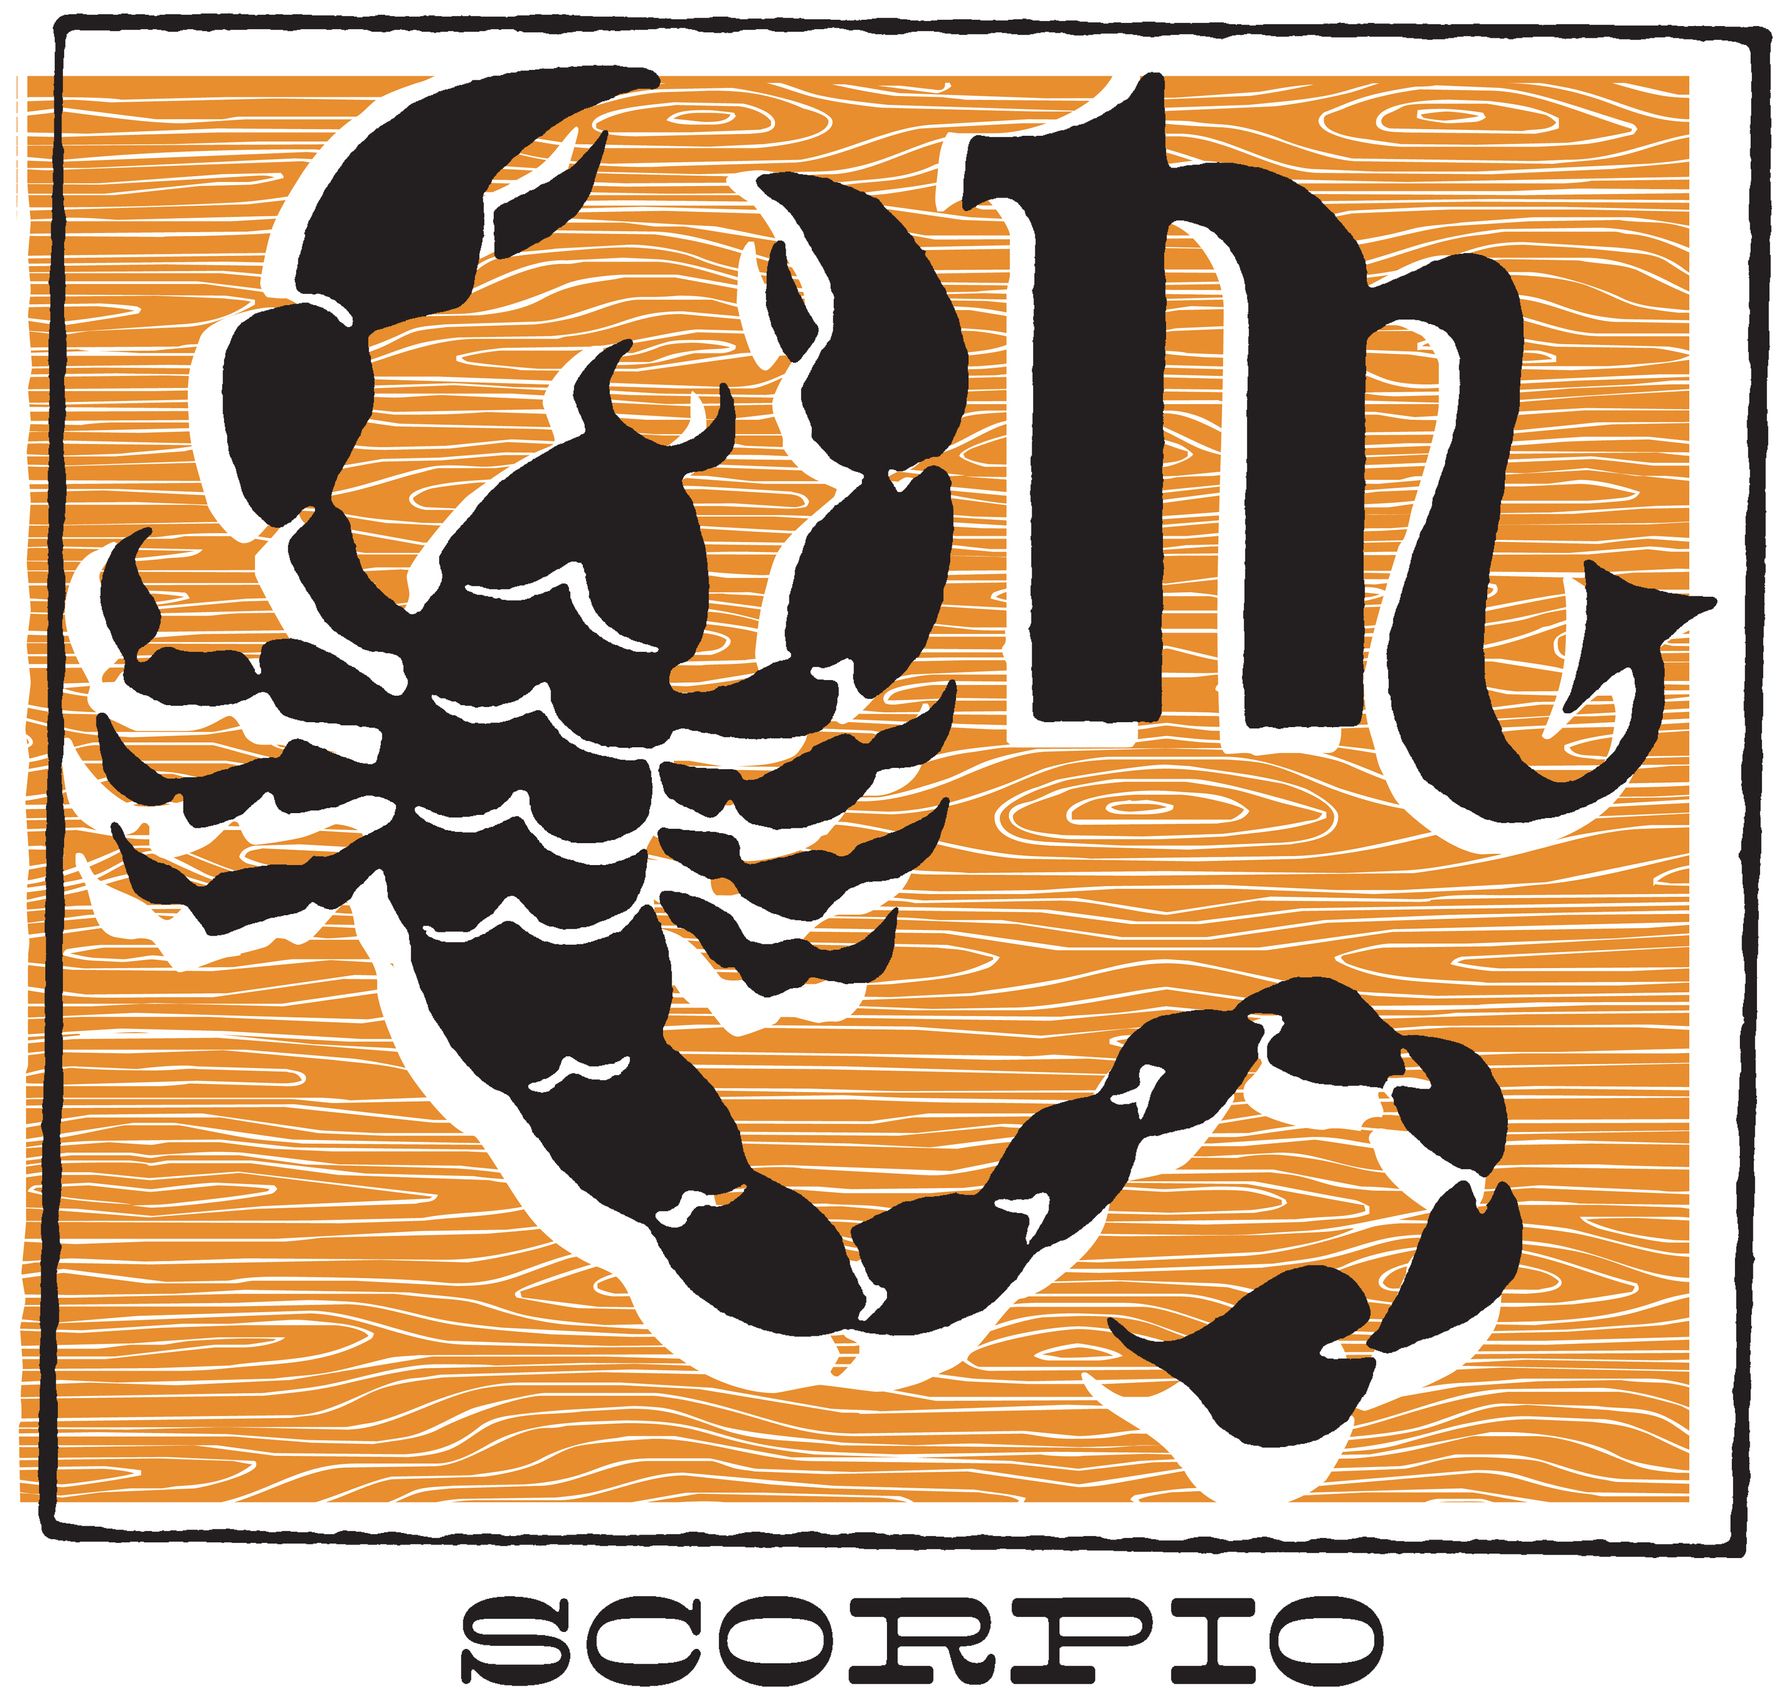 An image of the Scorpio zodiac sign. | Source: Getty Images